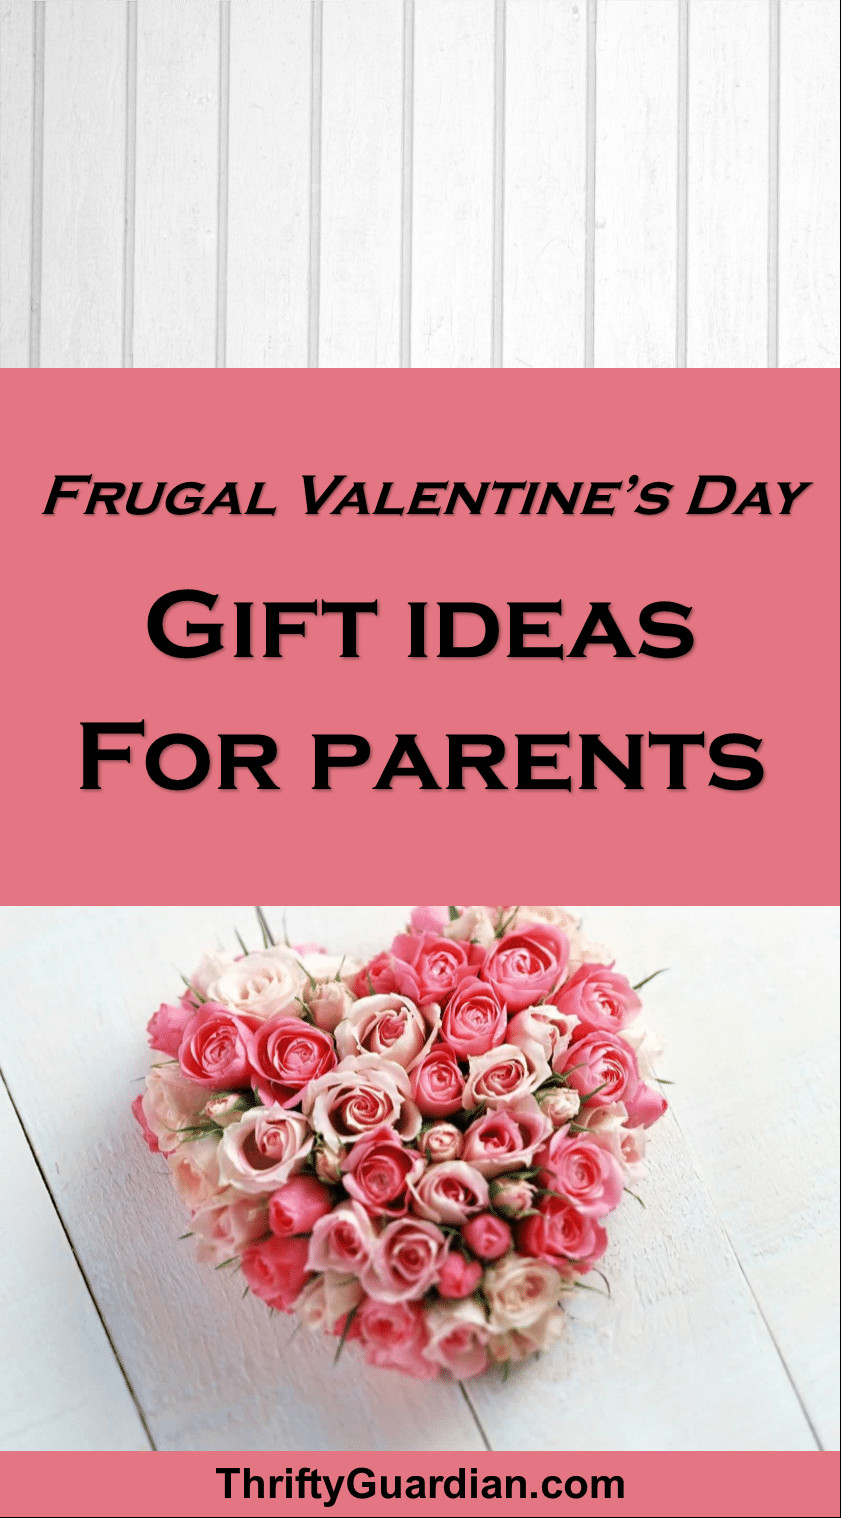 Valentine'S Day Gift Ideas For Parents
 Valentine s Day Gift Ideas for Parents Thrifty Guardian